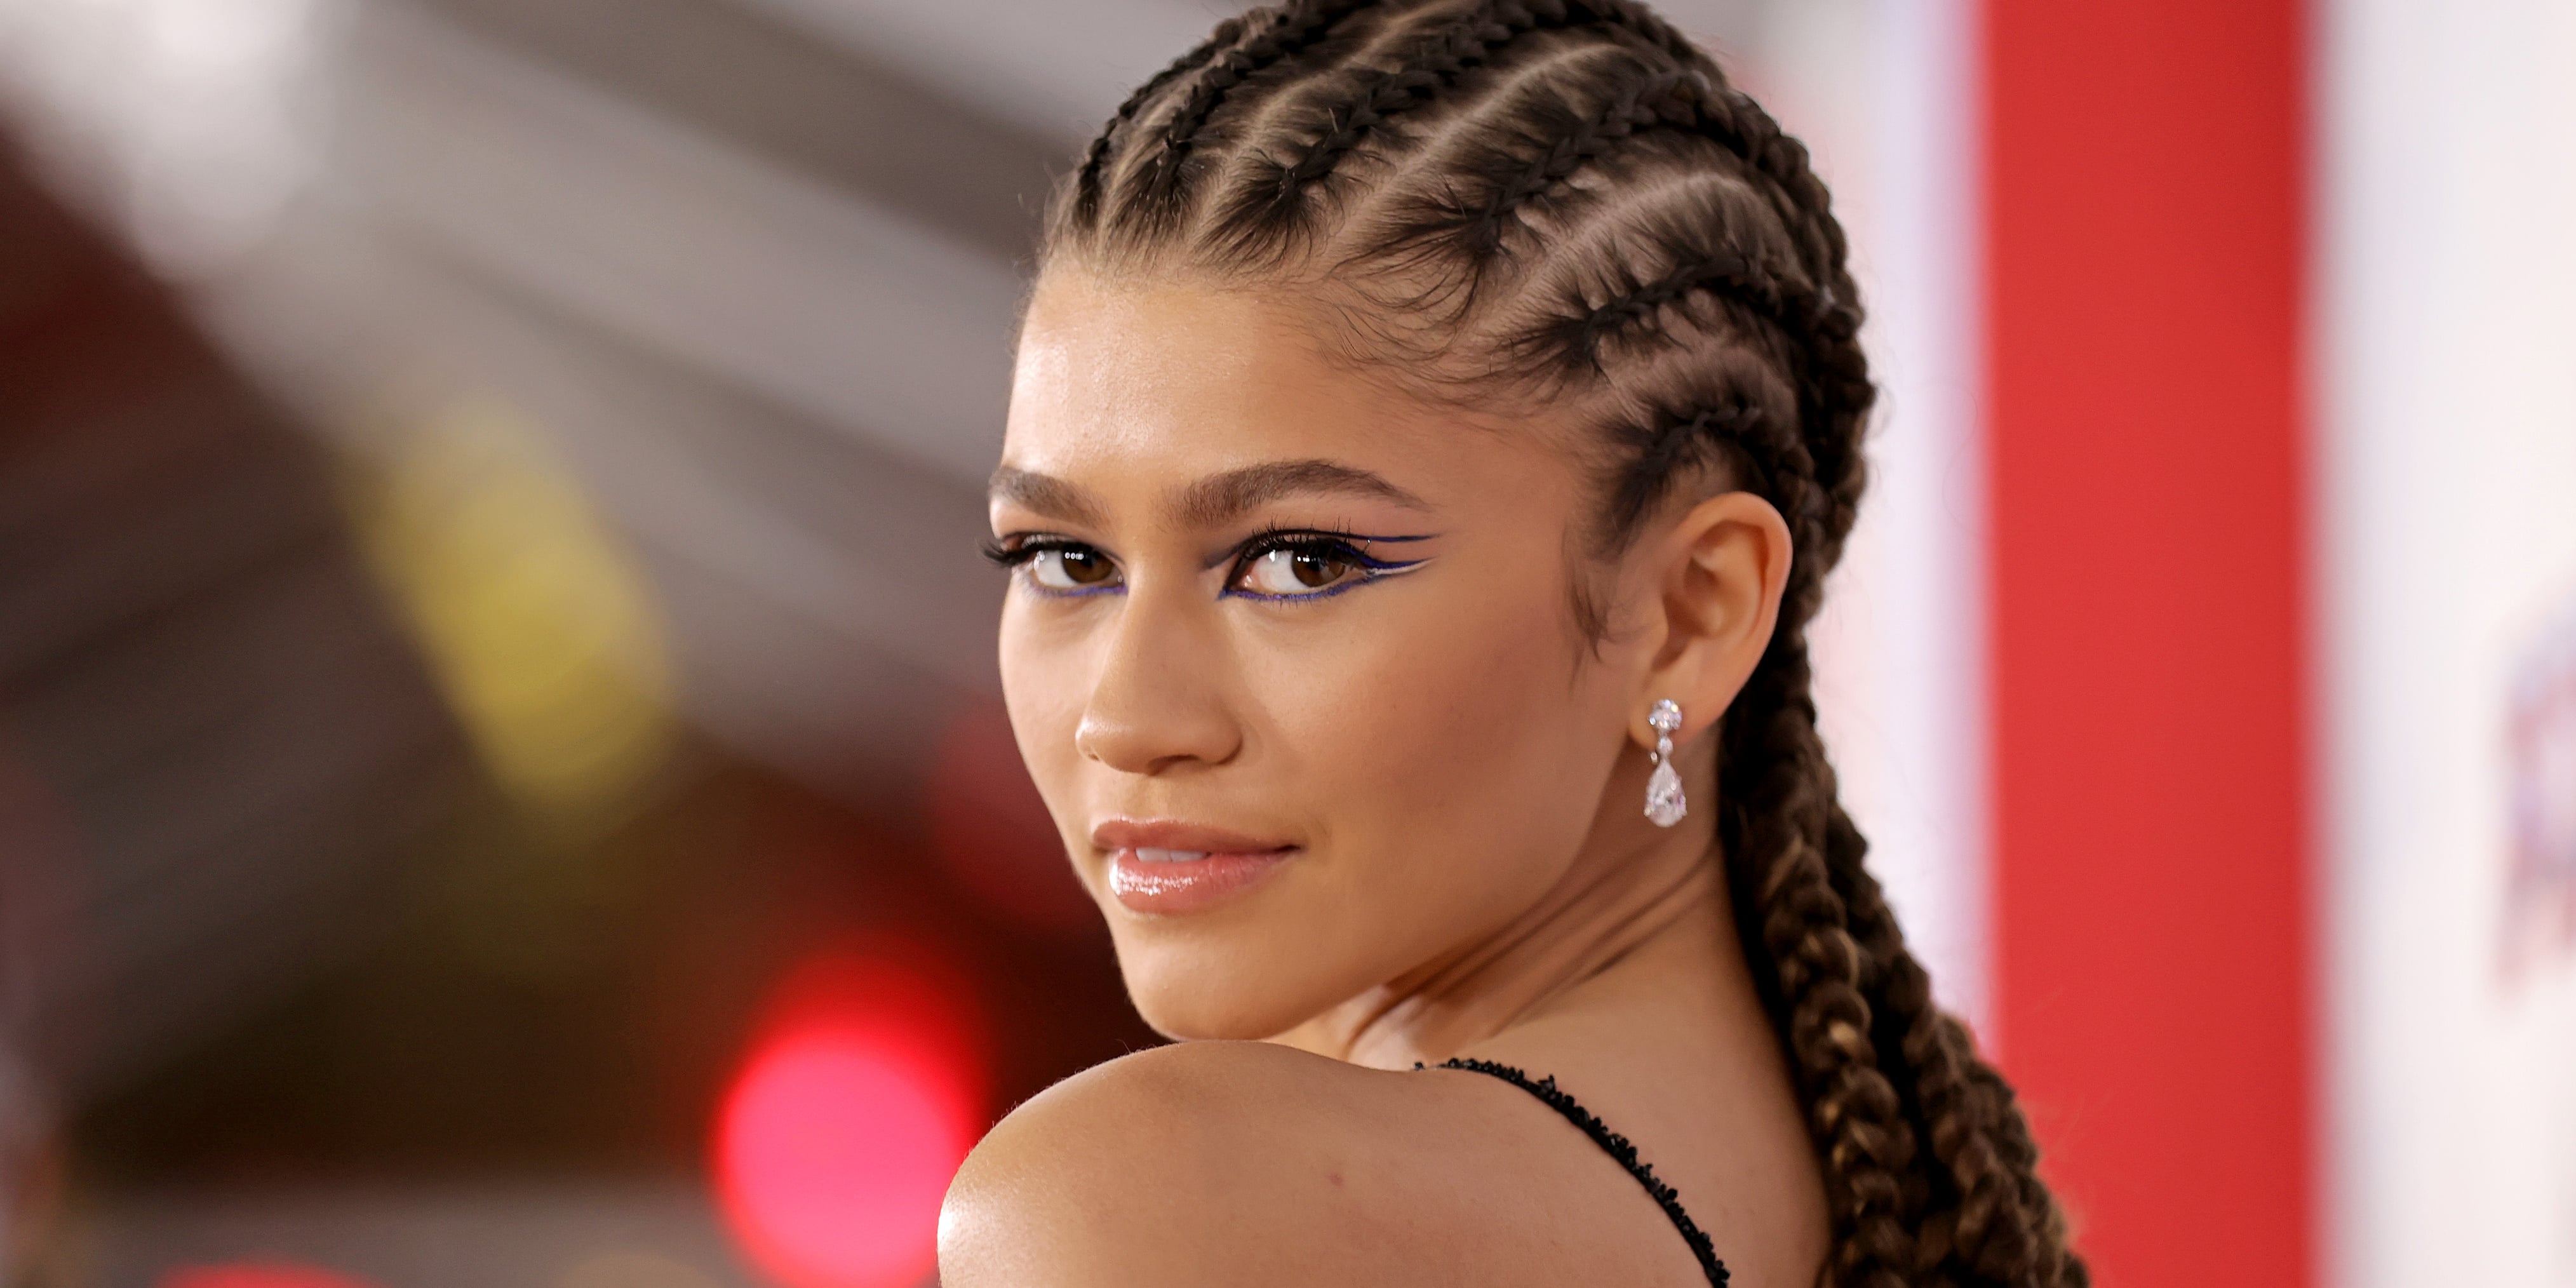 Micro braids hairstyles: 7 Celebrity looks you have to see